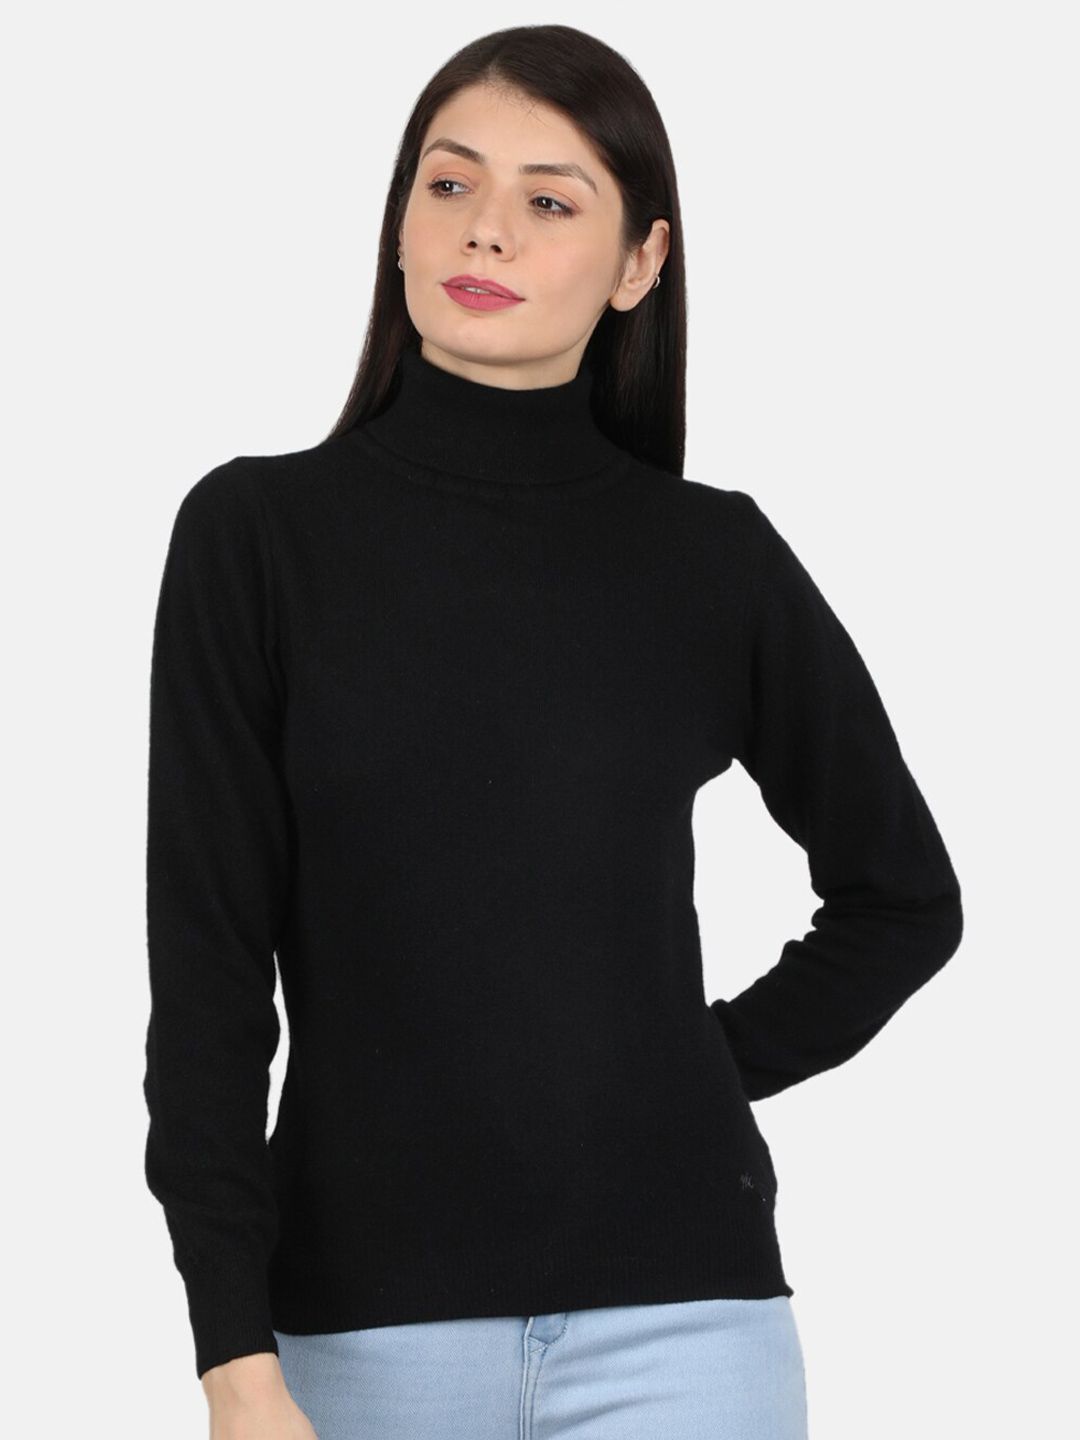 Monte Carlo Women's Angoora Black Solid High Neck Sceavy Top Price in India